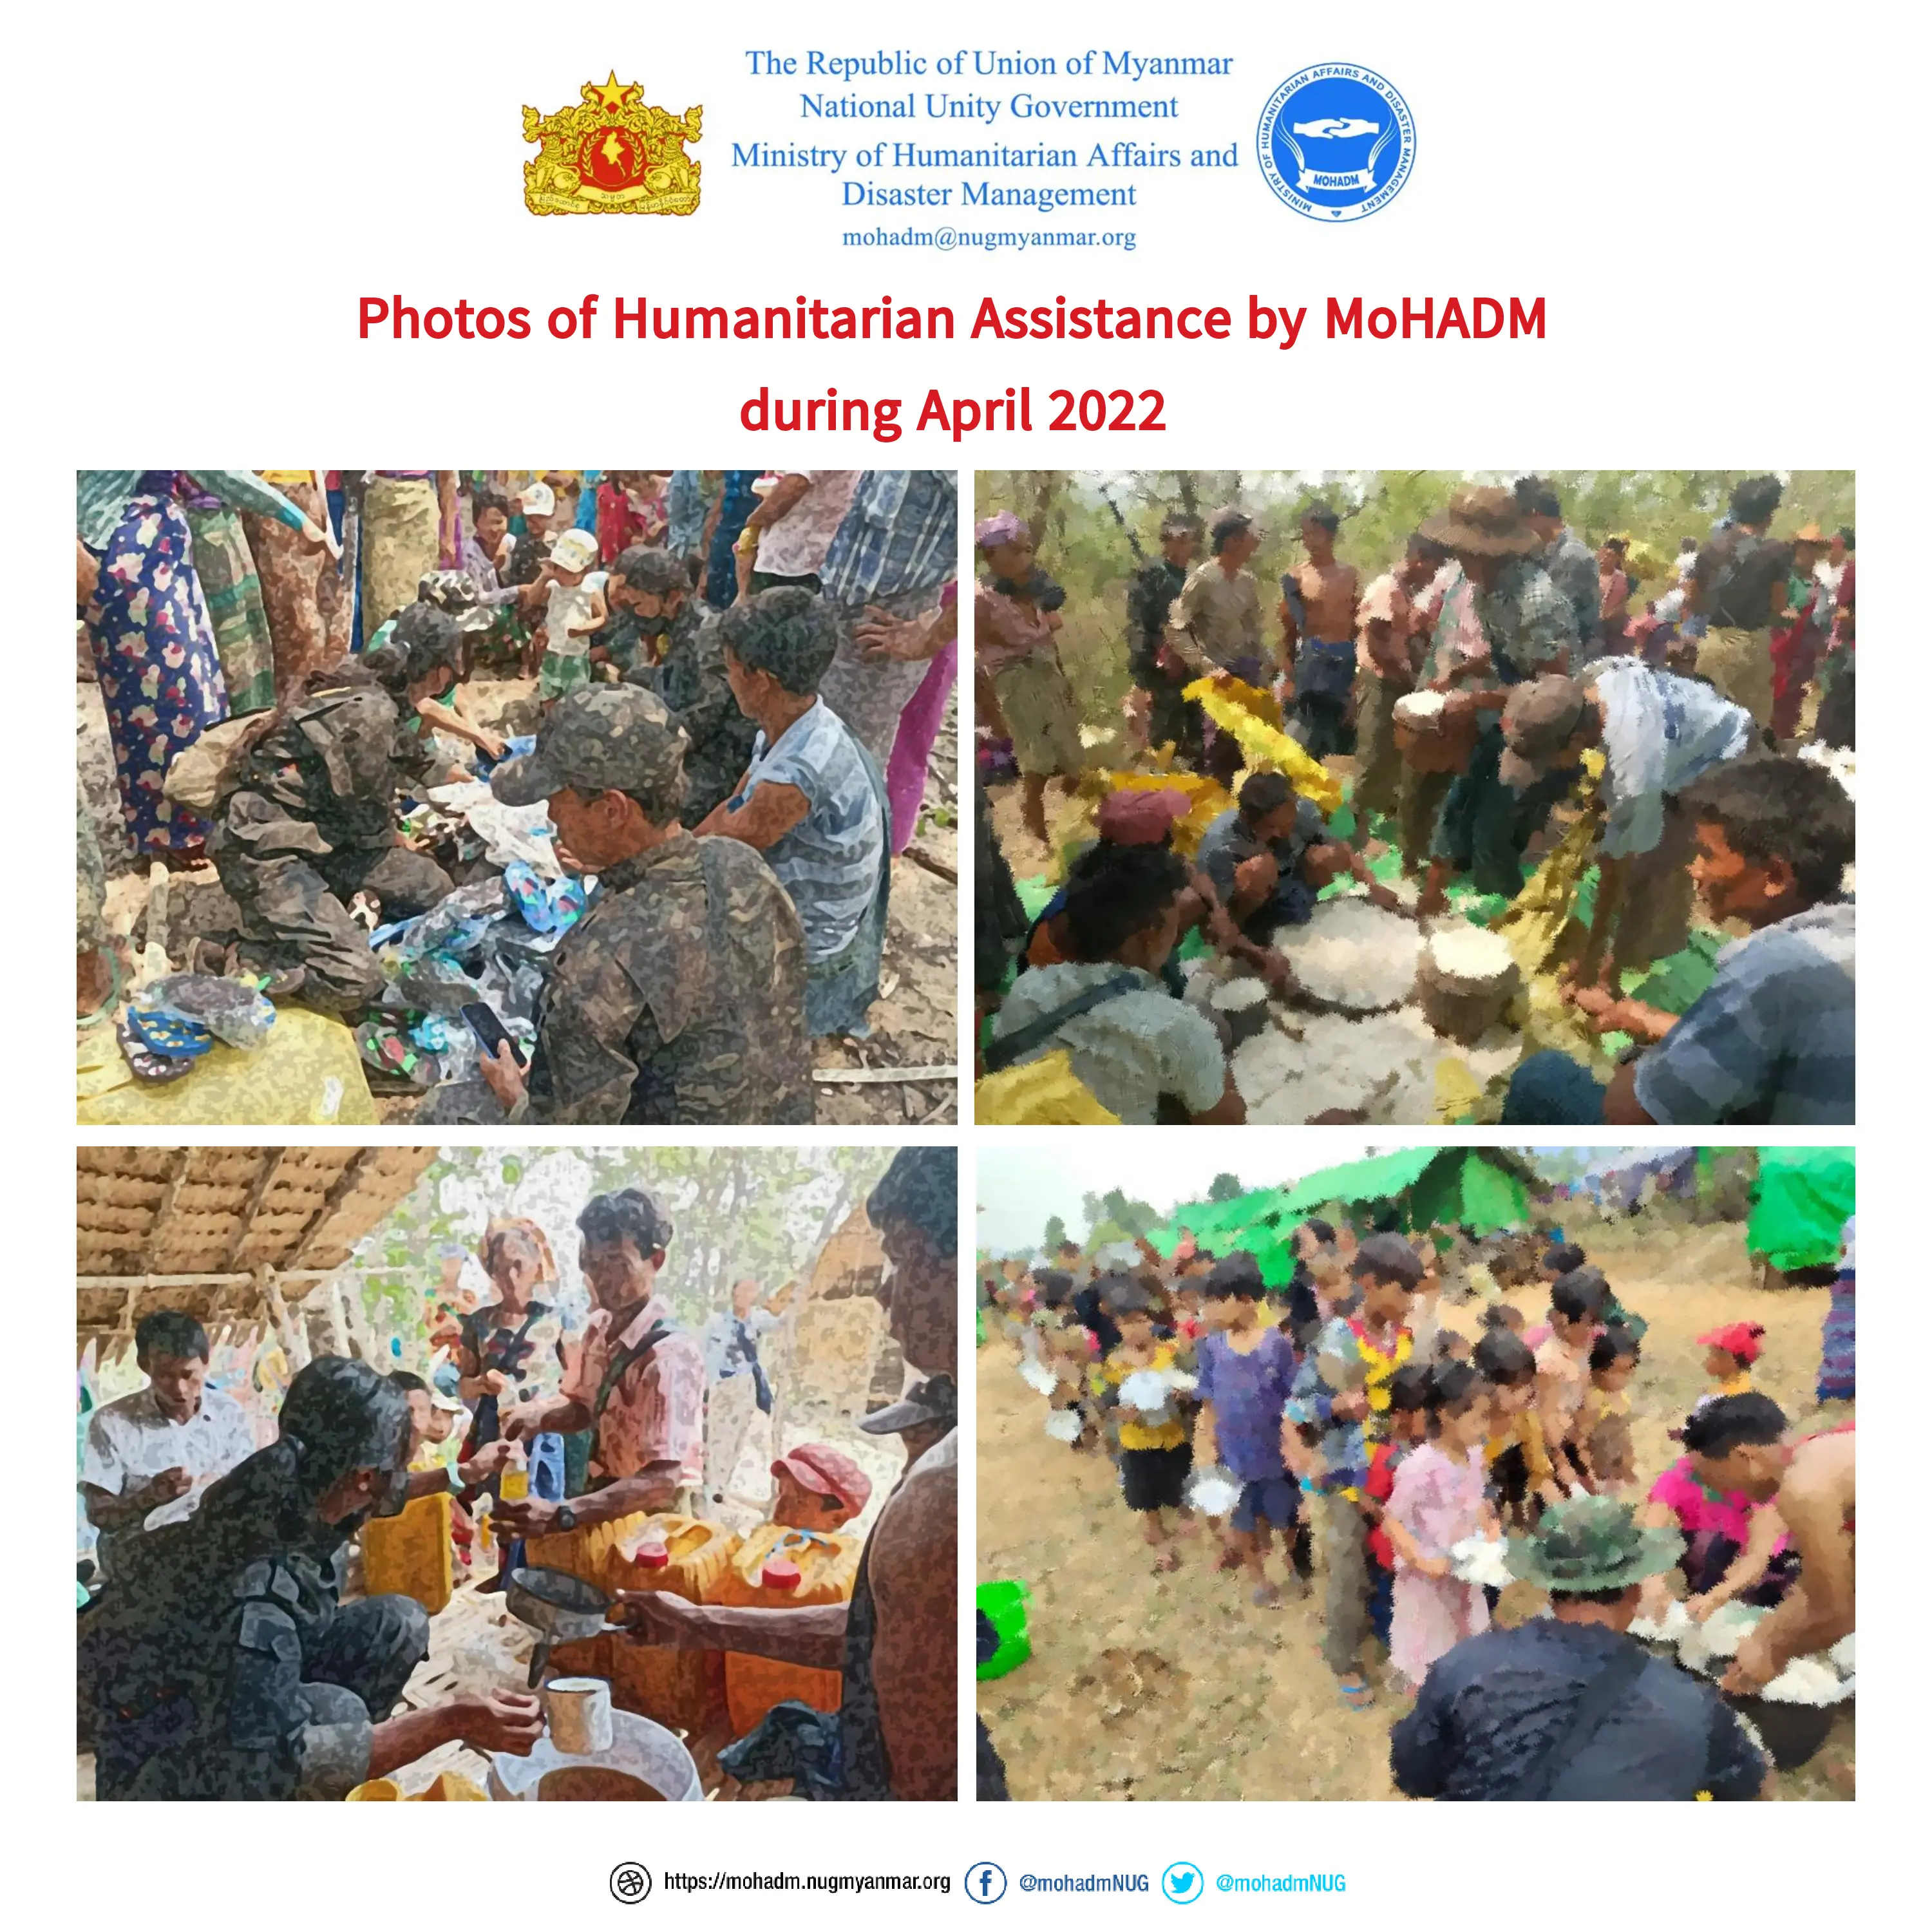 Summary of humanitarian aid provision by MoHADM (April 2022)